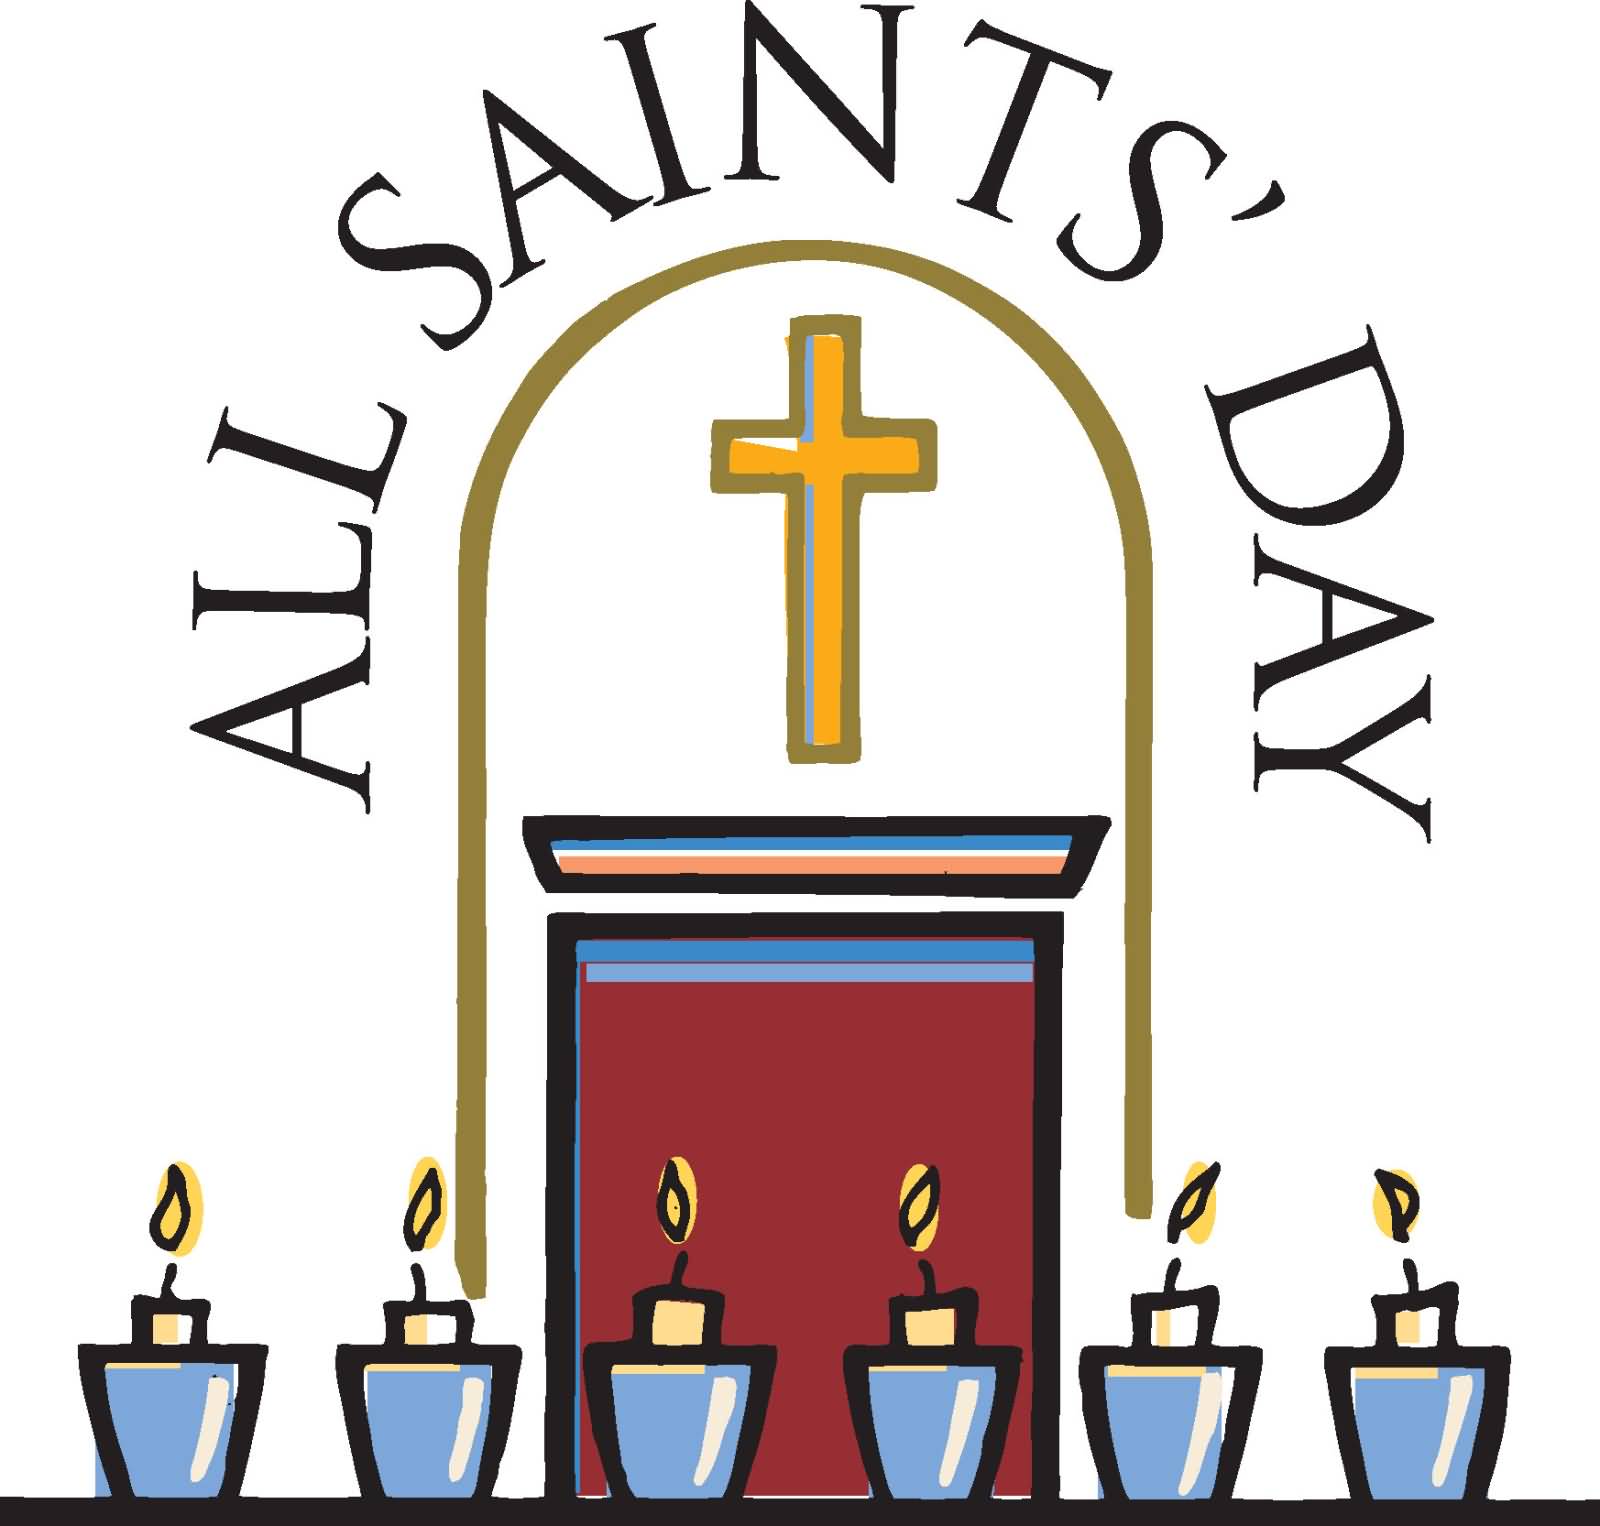 60 Most Amazing All Saints Day Greeting Pictures And Images